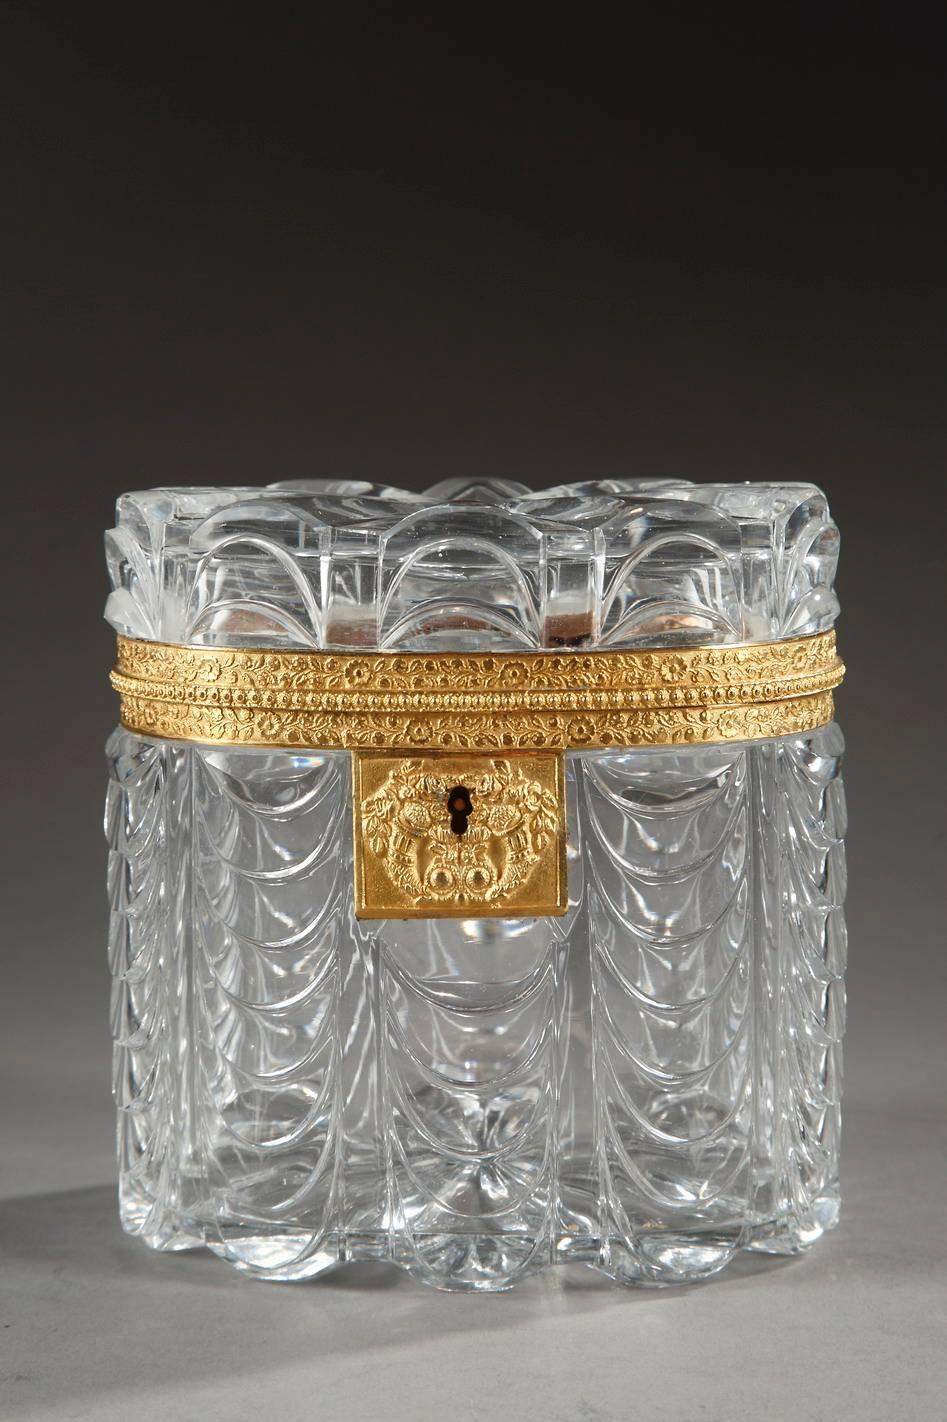 Beautiful oval jewelry box in cut crystal decorated with stylized waves. Radiating lines are etched in the crystal glass lid. An intricate cornucopia and flower design embellishes the sculpted and gilded bronze frame,

circa 1820.
Dimension: L: